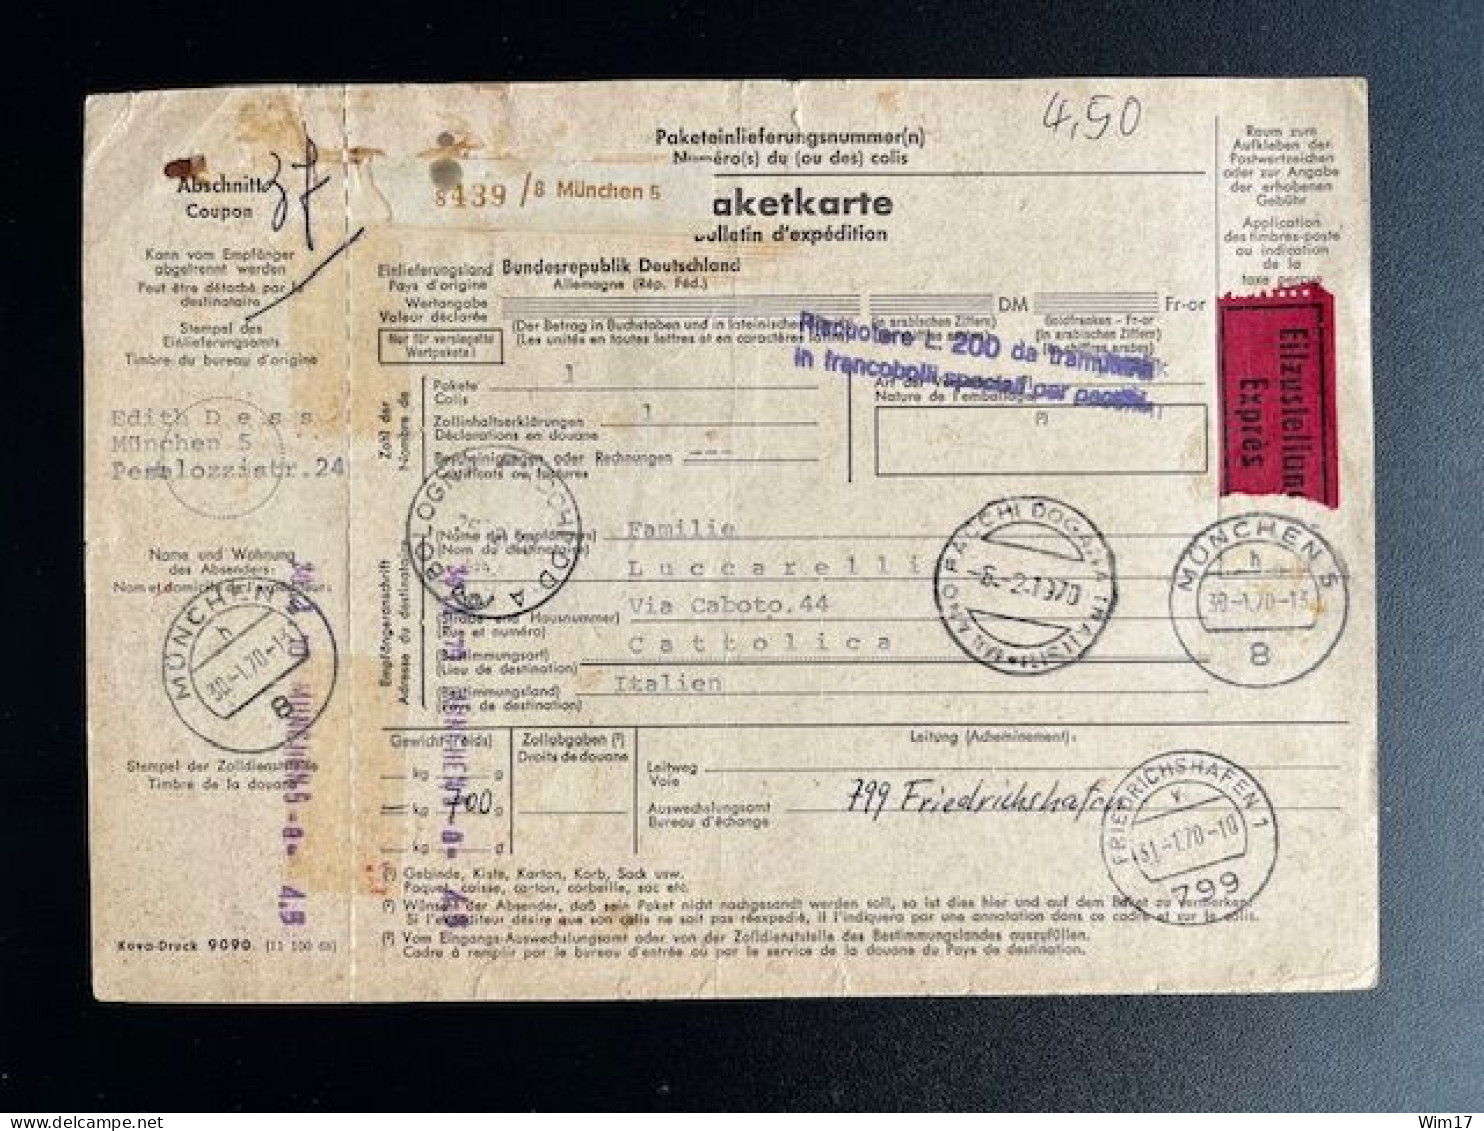 GERMANY 1970 EXPRESS PARCEL CARD MUNCHEN TO CATTOLICA ITALY 30-01-1970 DUITSLAND DEUTSCHLAND EXPRES - Covers & Documents